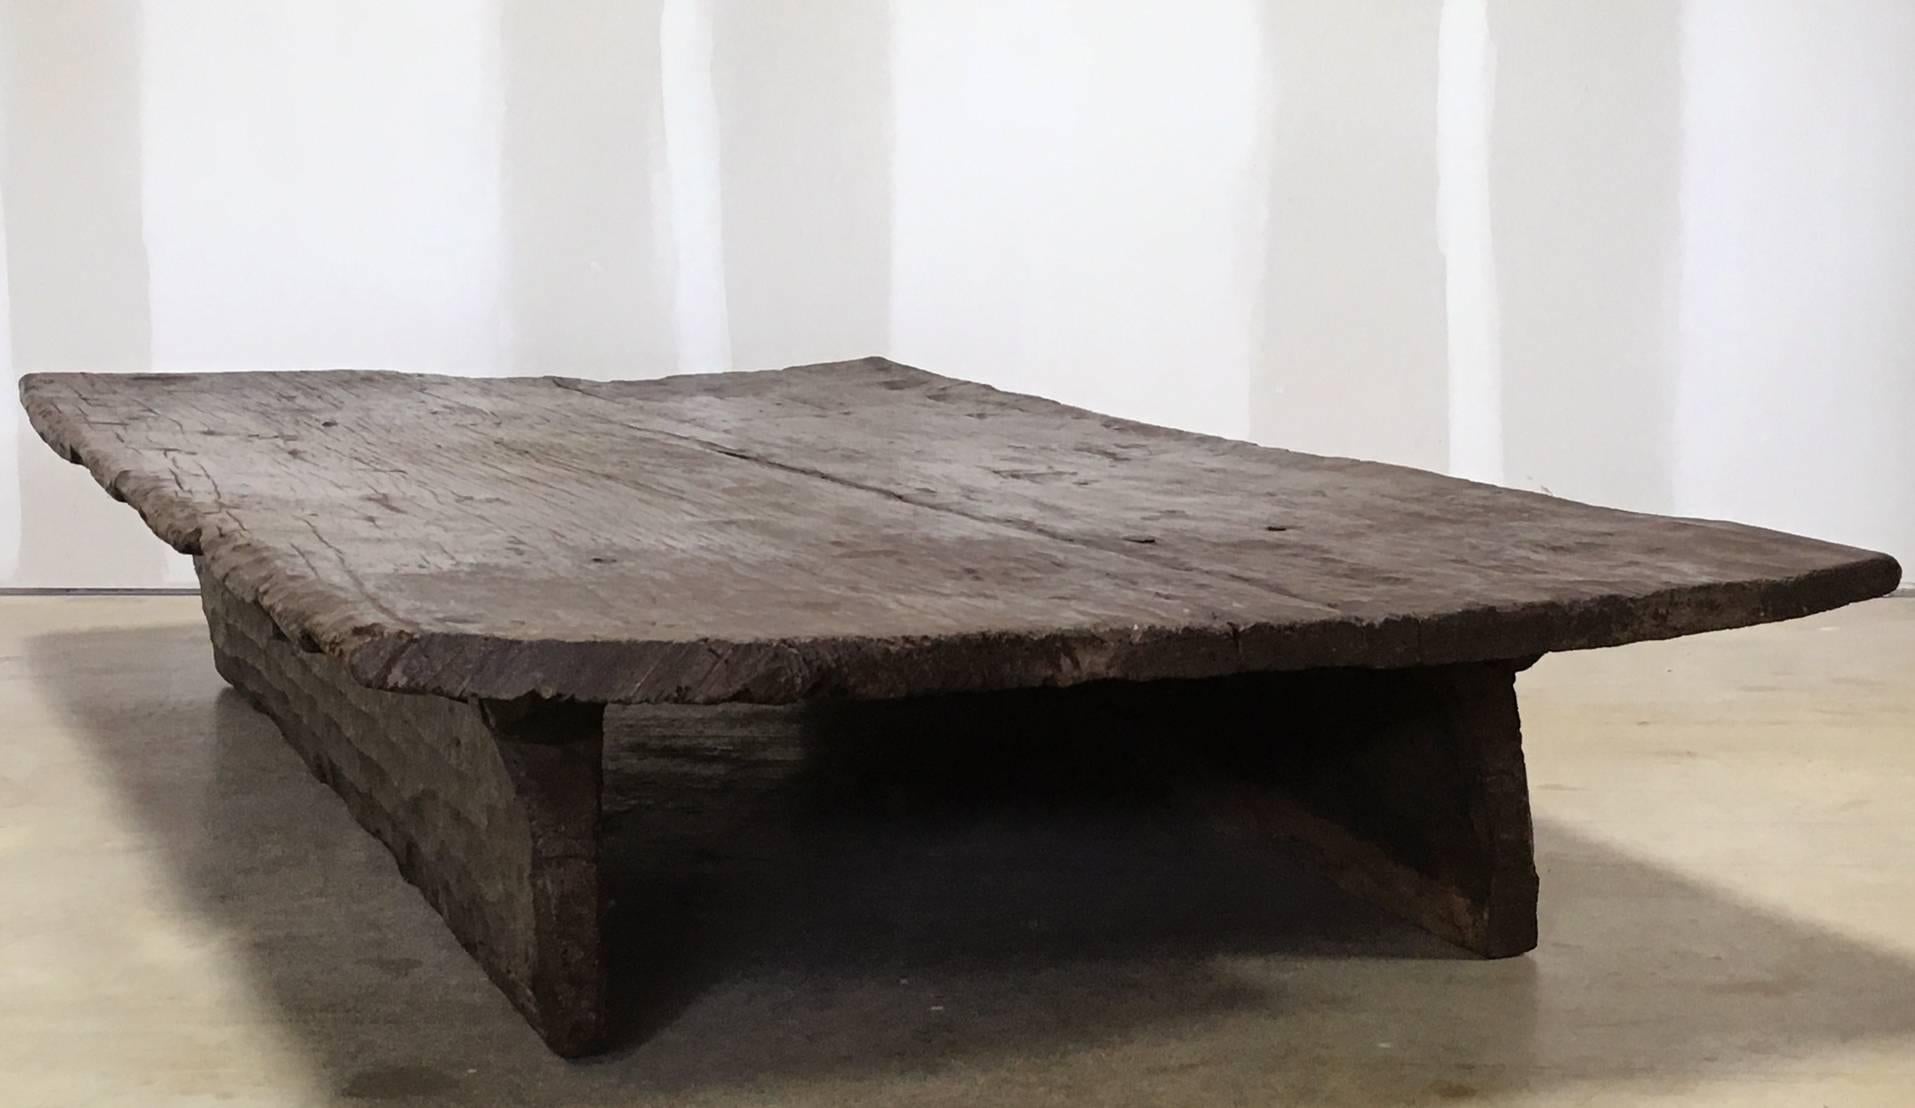 A massive teak single board table, possibly from a temple, circa early 20th century, India. The top is cut from a single piece of wood, and the base is open, with two cut pieces of wood on the sides, and ends being open. A rich and warm patina